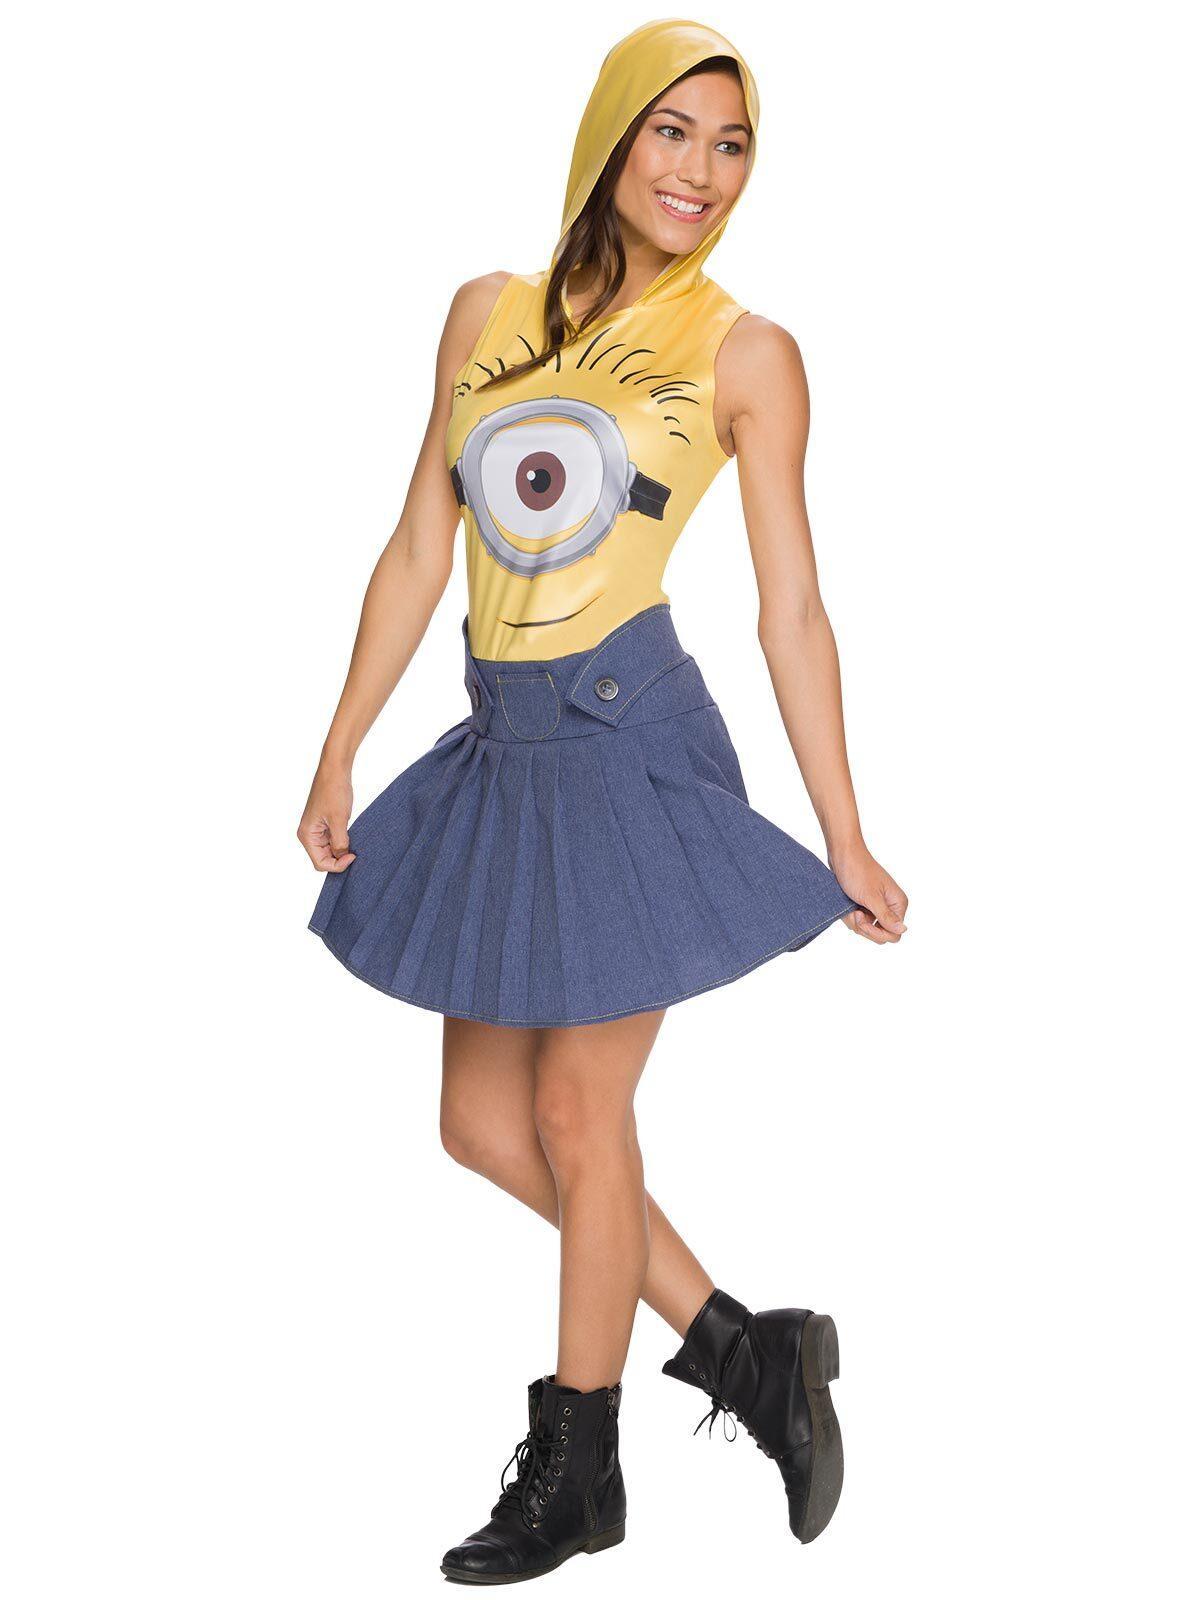 Marvel Minion Face Dress Adult Womens Dress Up Halloween Costume Outfit